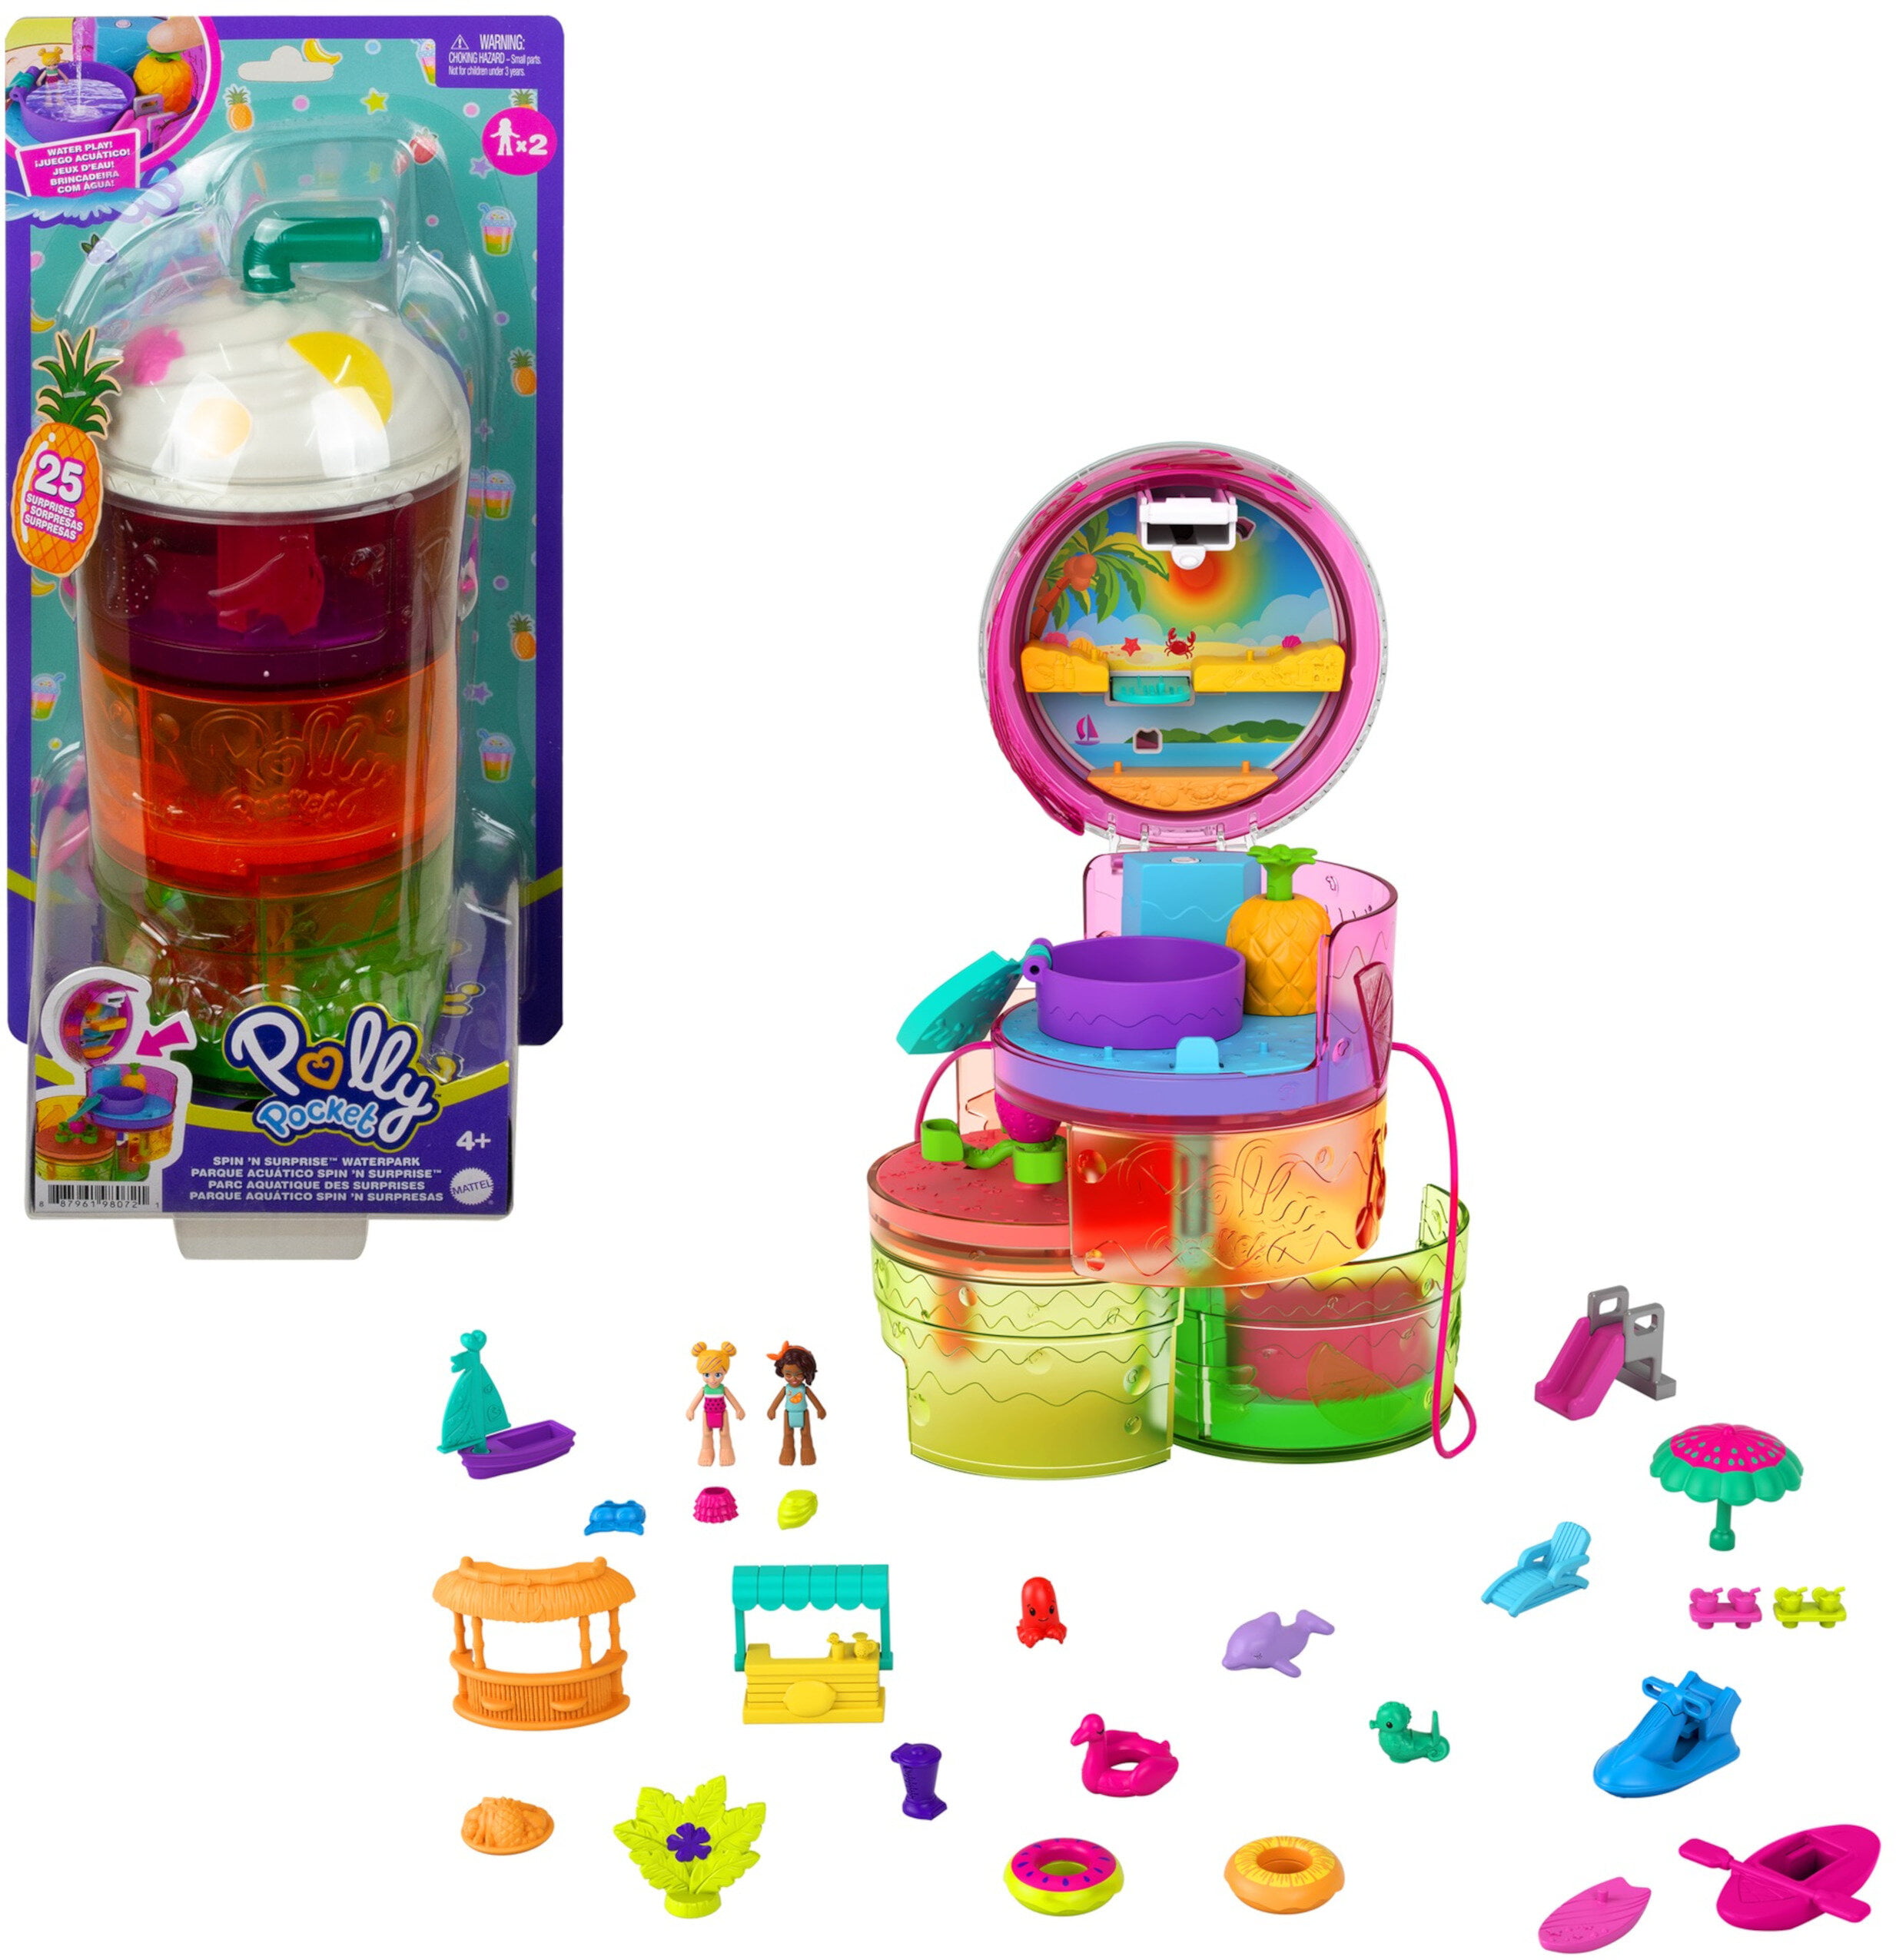 Polly Pocket Spin N Surprise Smoothie Playground Playset Tropical Smoothie Drink 